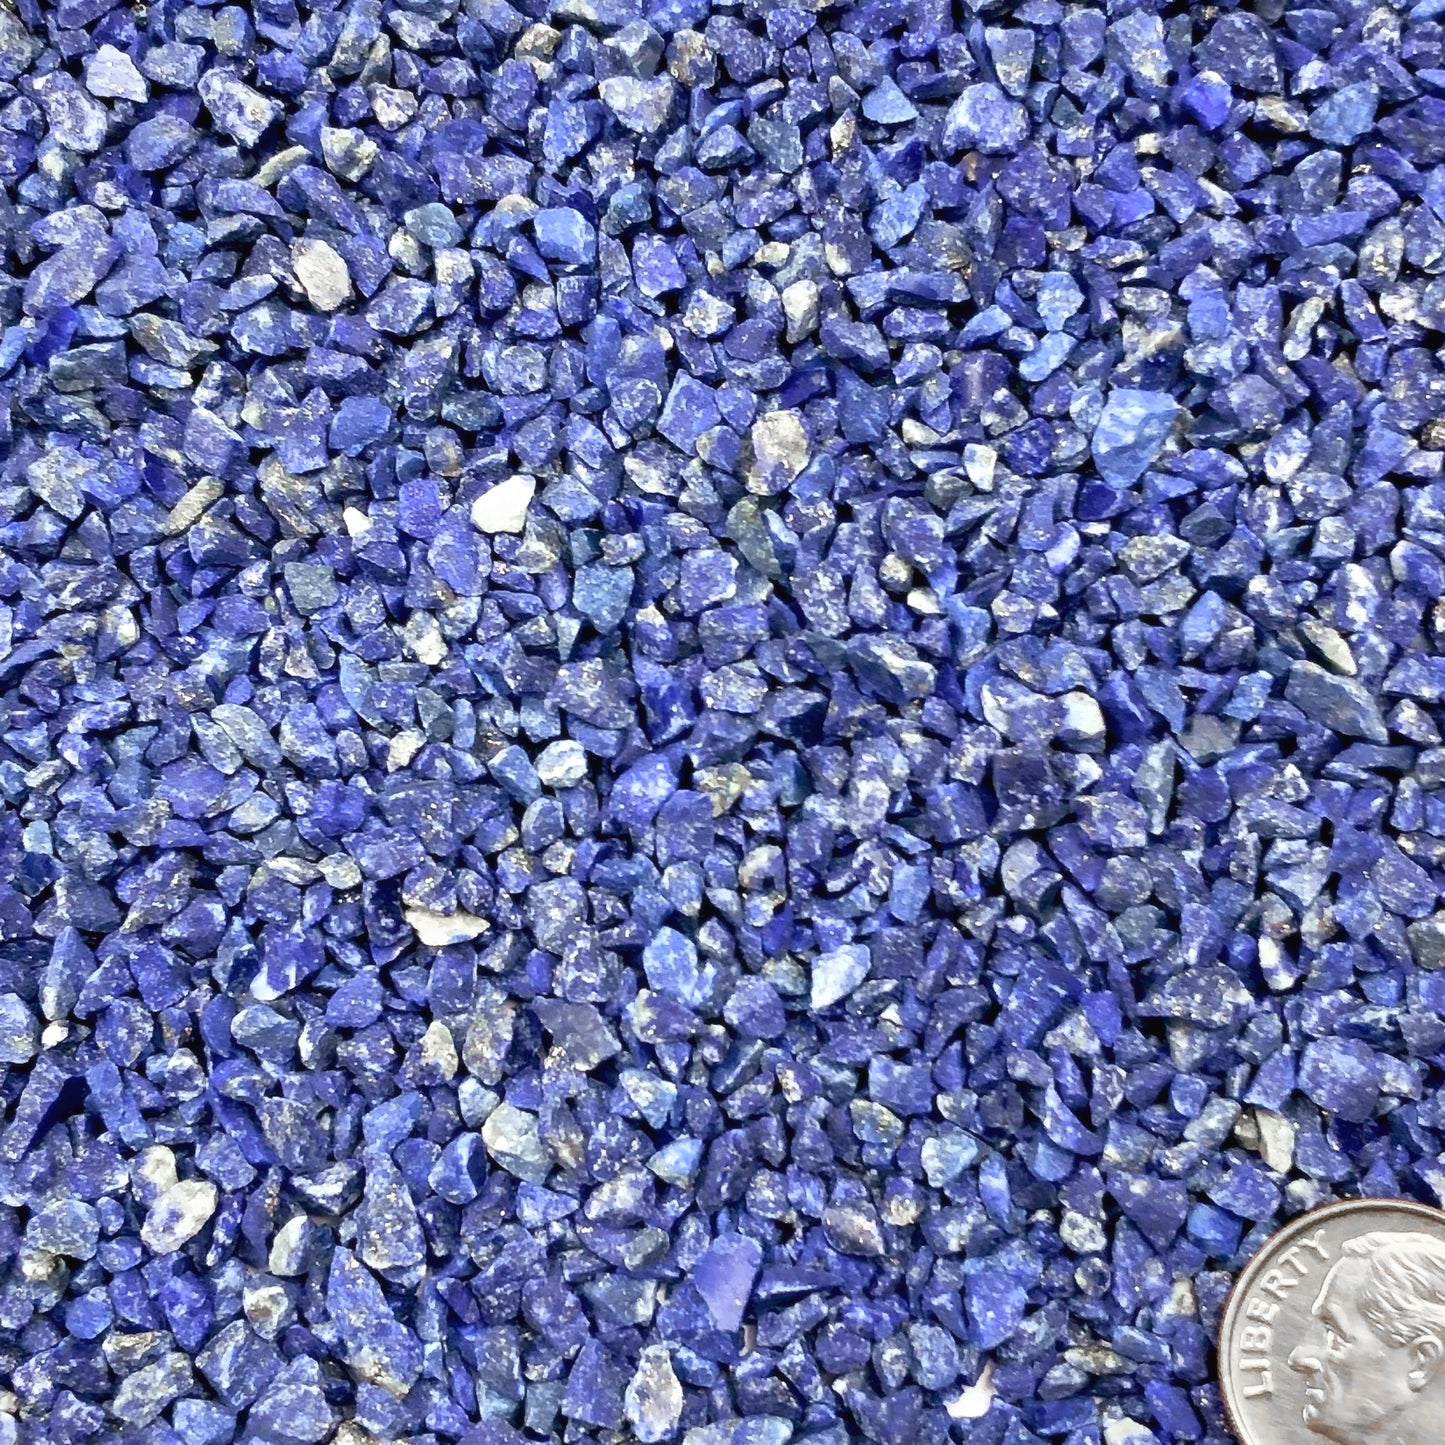 Crushed Royal Blue Lapis Lazuli (Grade AAA) from Afghanistan, Coarse Crush, Gravel Size, 4mm - 2mm